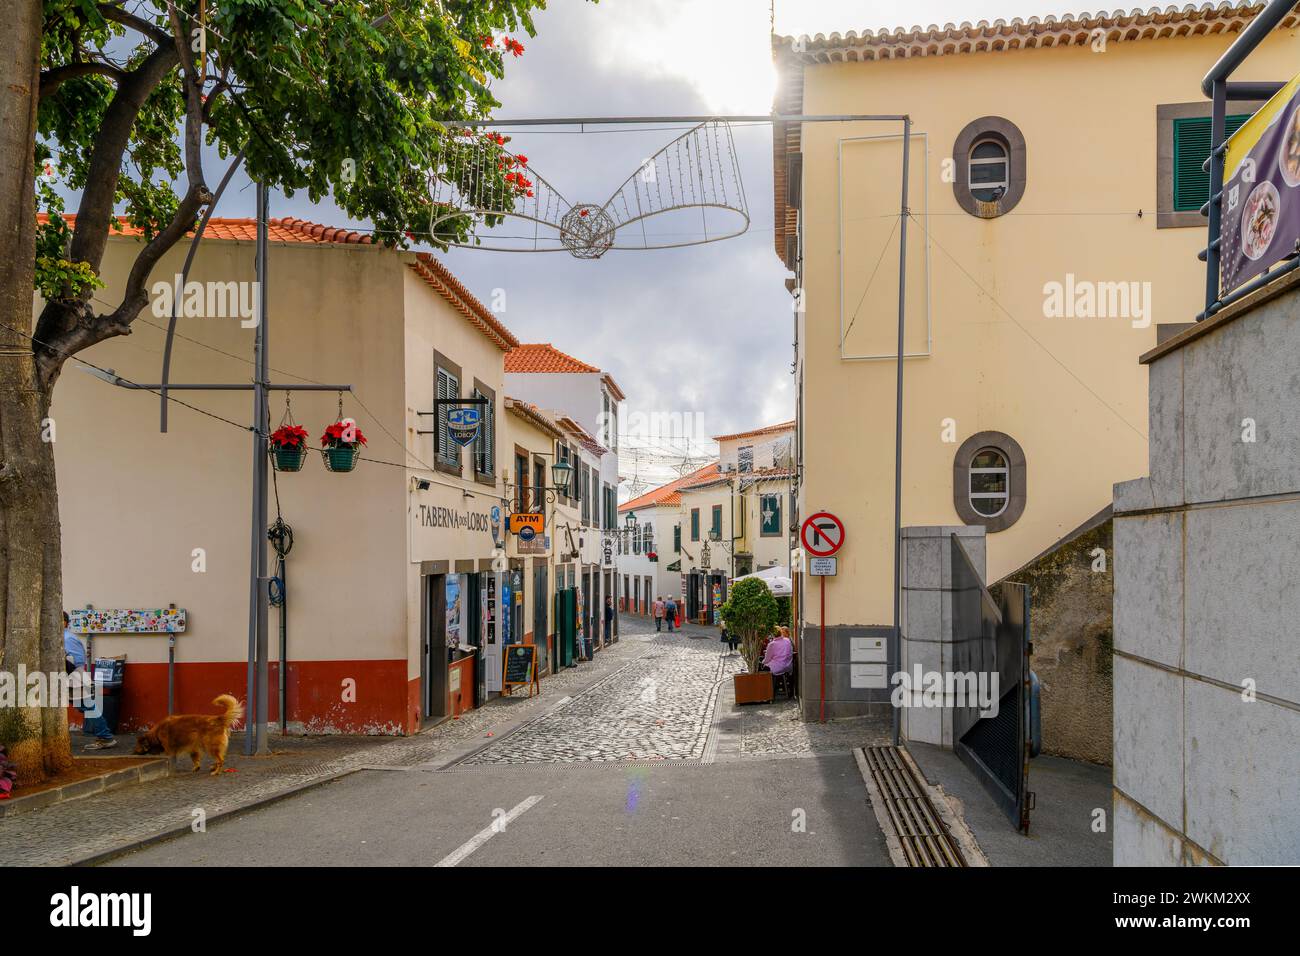 The famous Rua de Santa Maria narrow street of cafes, colorful doors and shops in the historic medieval old town of Funchal, Madeira Portugal. Stock Photo